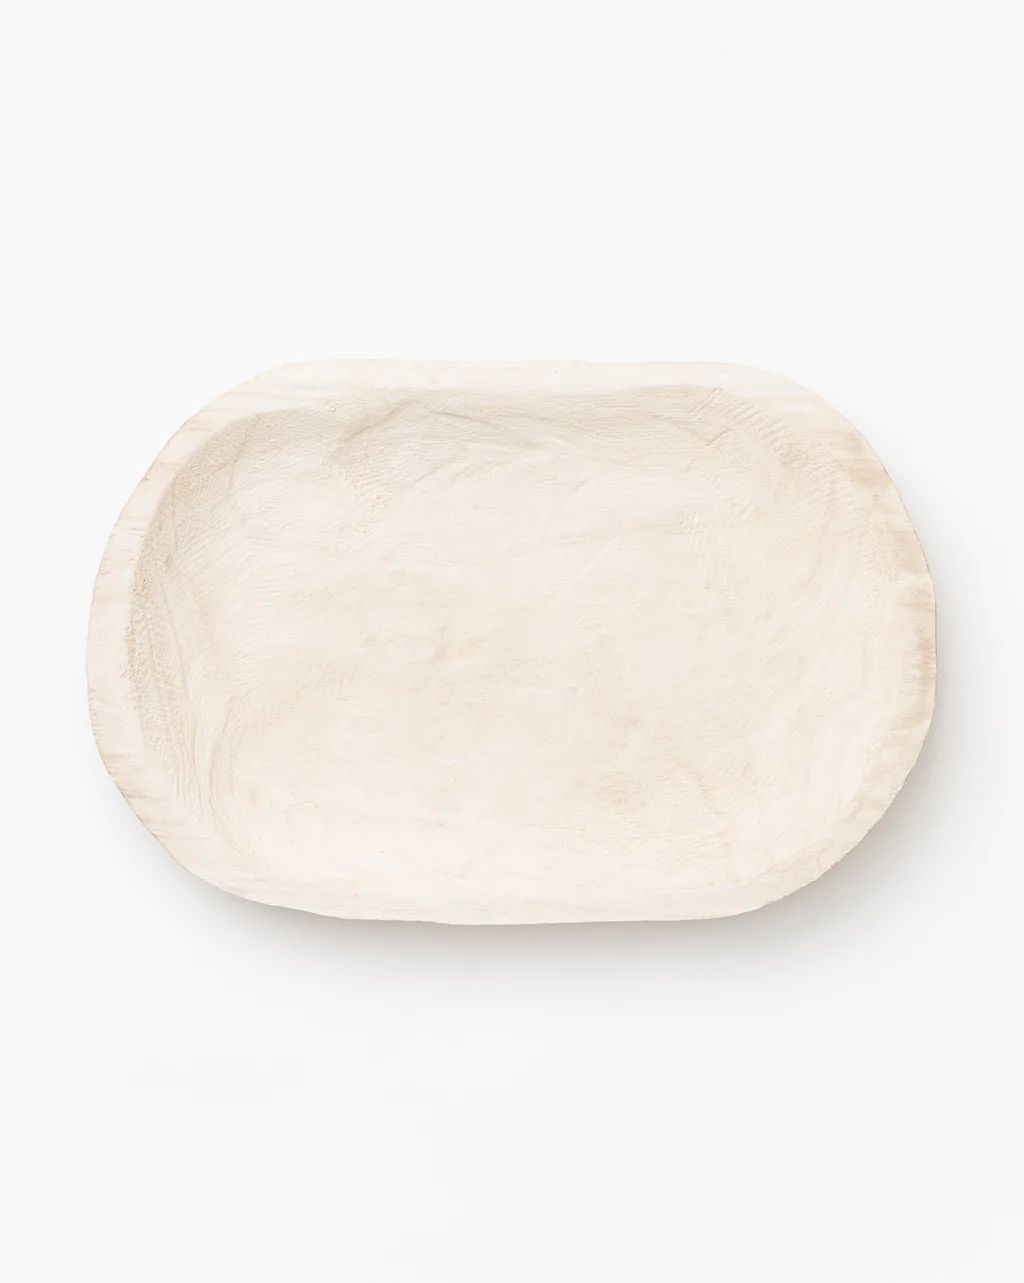 Carved Wooden Tray | McGee & Co.